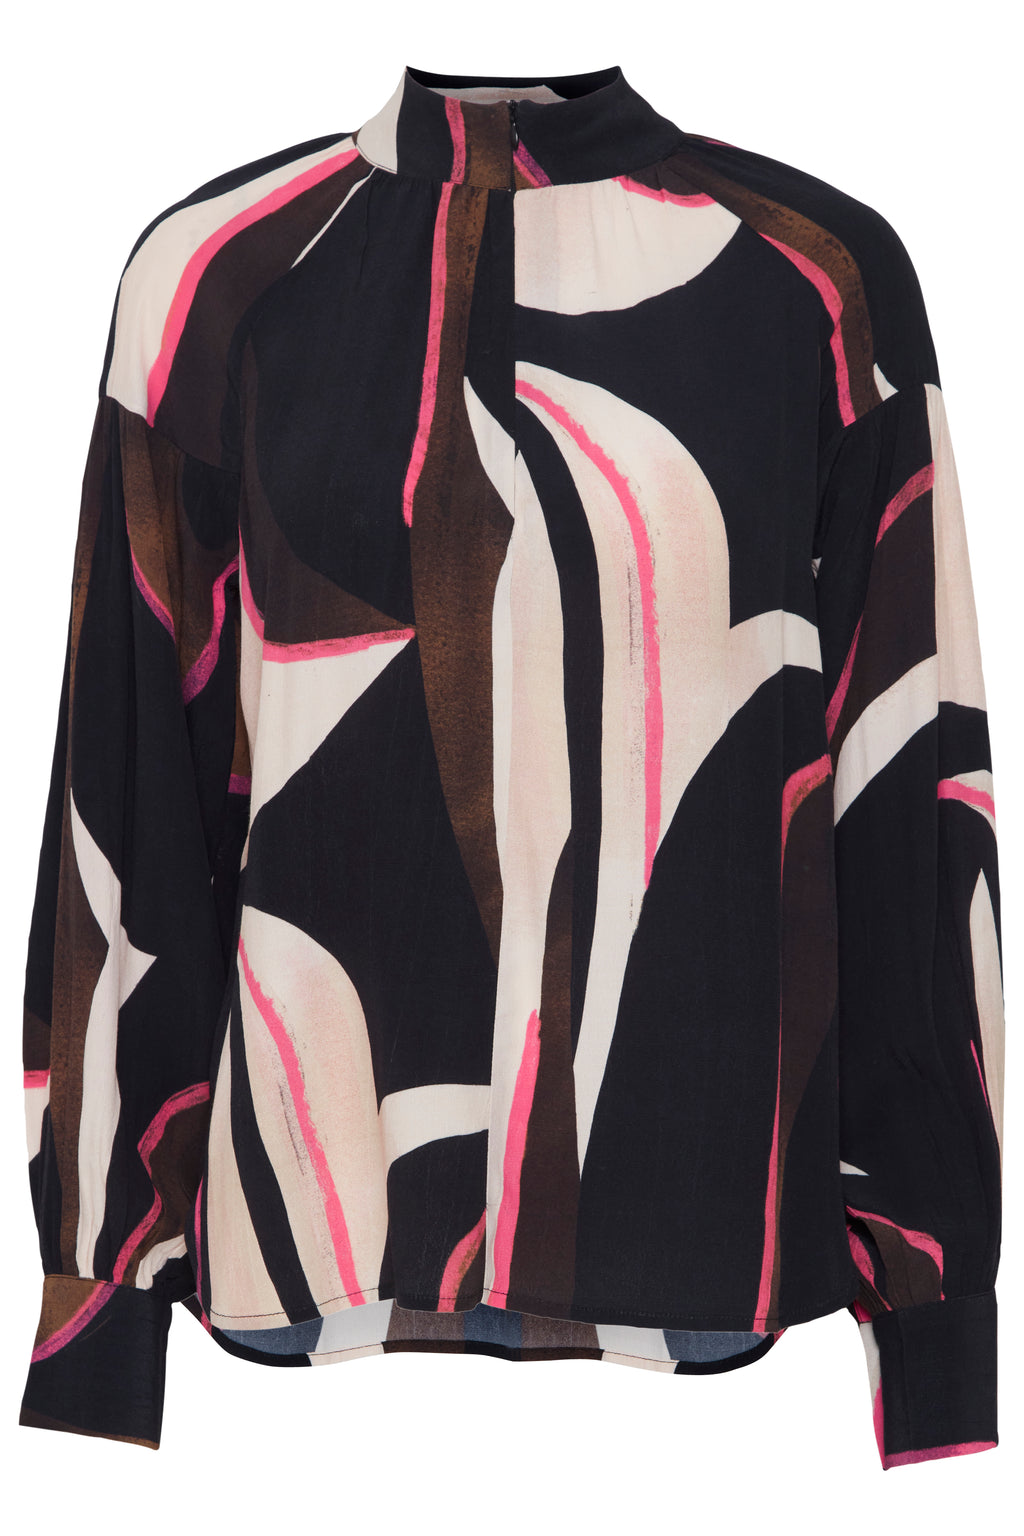 Fransa Frlena Navy Blazer/Pink Abstract Ruby 20613285 Printed Blouse, 67 Boutique –